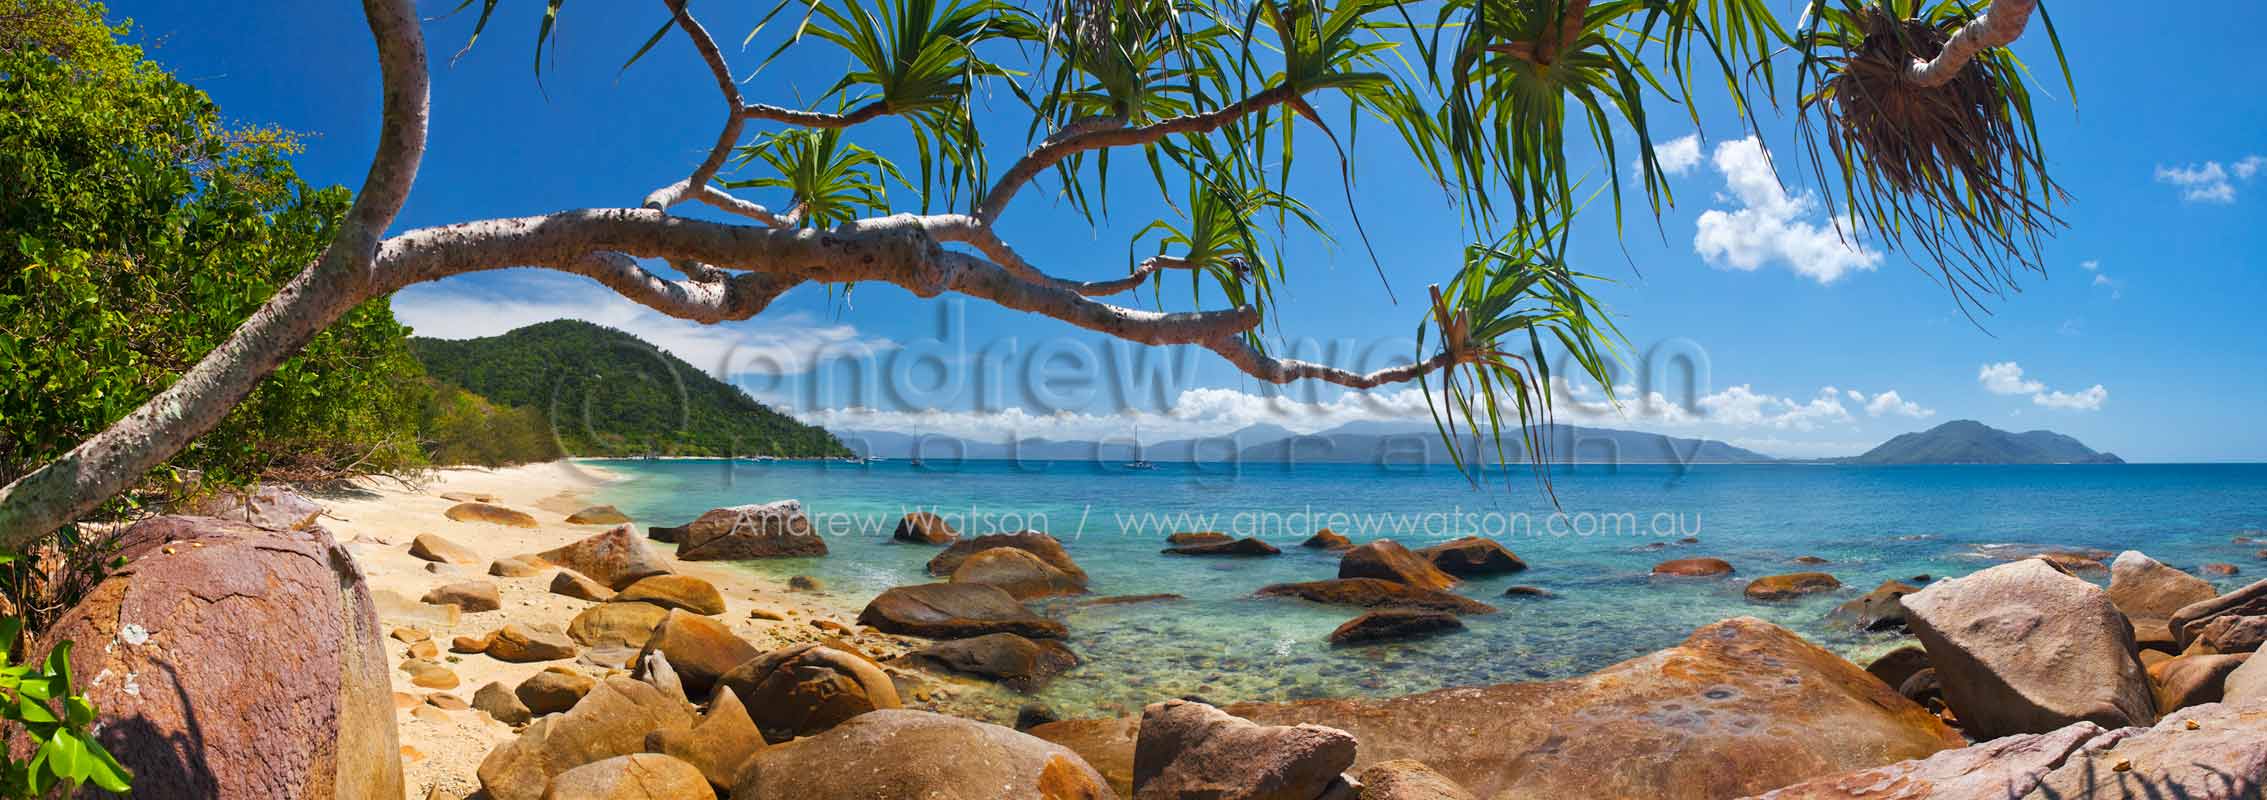 View along beach at Welcome BayFitzroy Island, Cairns, North QueenslandImage available for licensing or as a fine-art print... please enquire